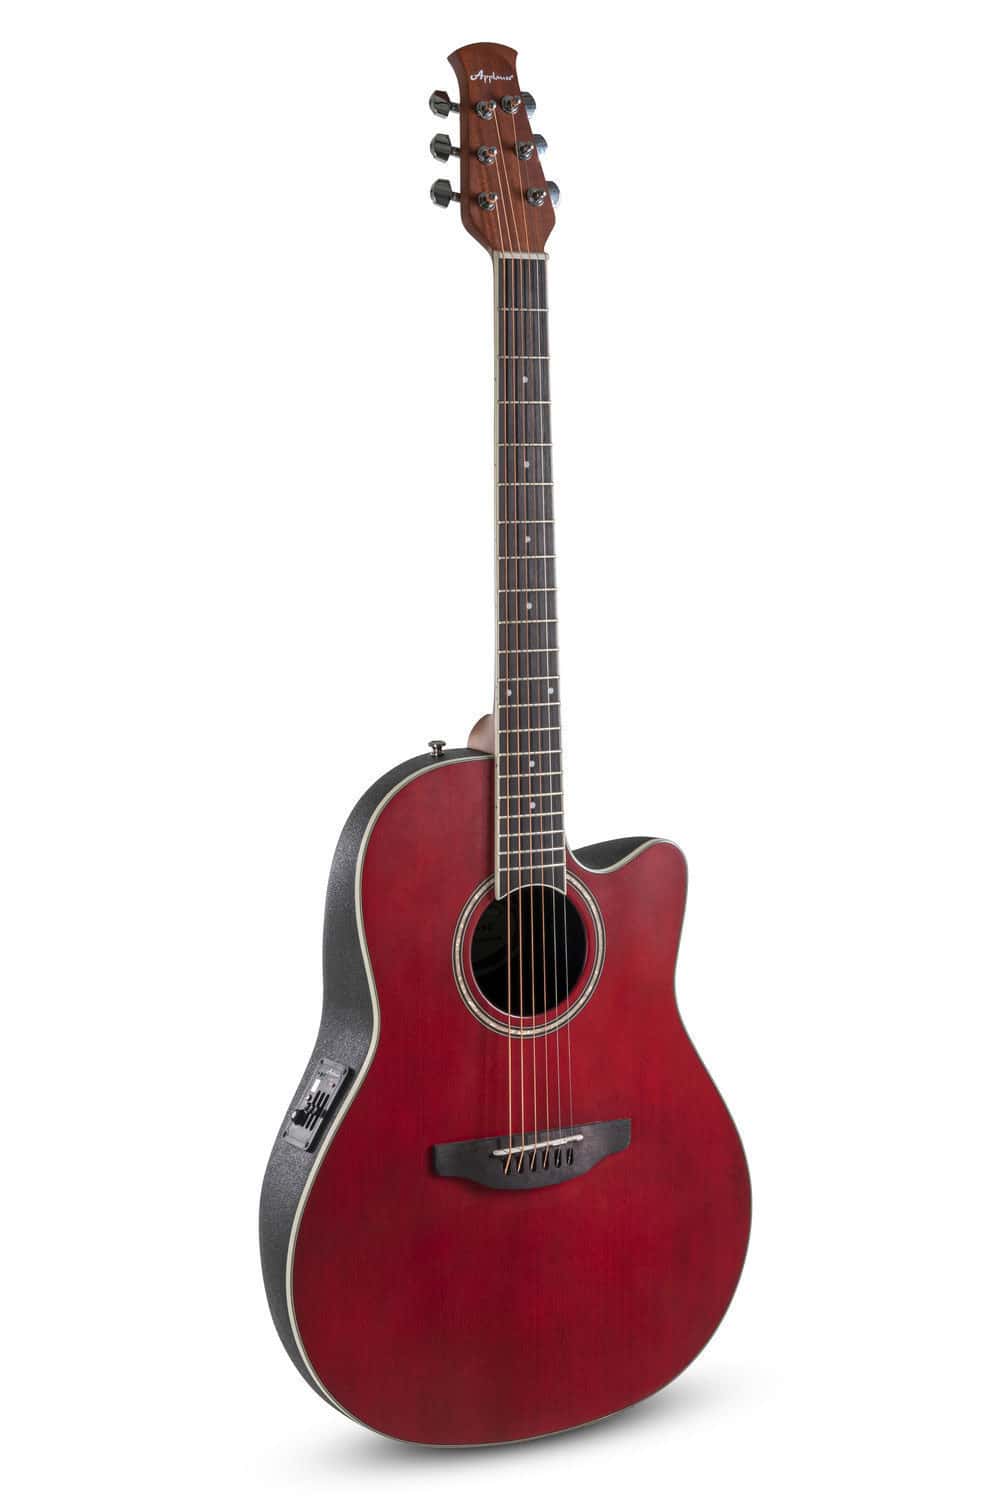 APPLAUSE E-AKUSTIKGITARRE TRADITIONAL AB24 MID CUTAWAY RUBY RED SATIN